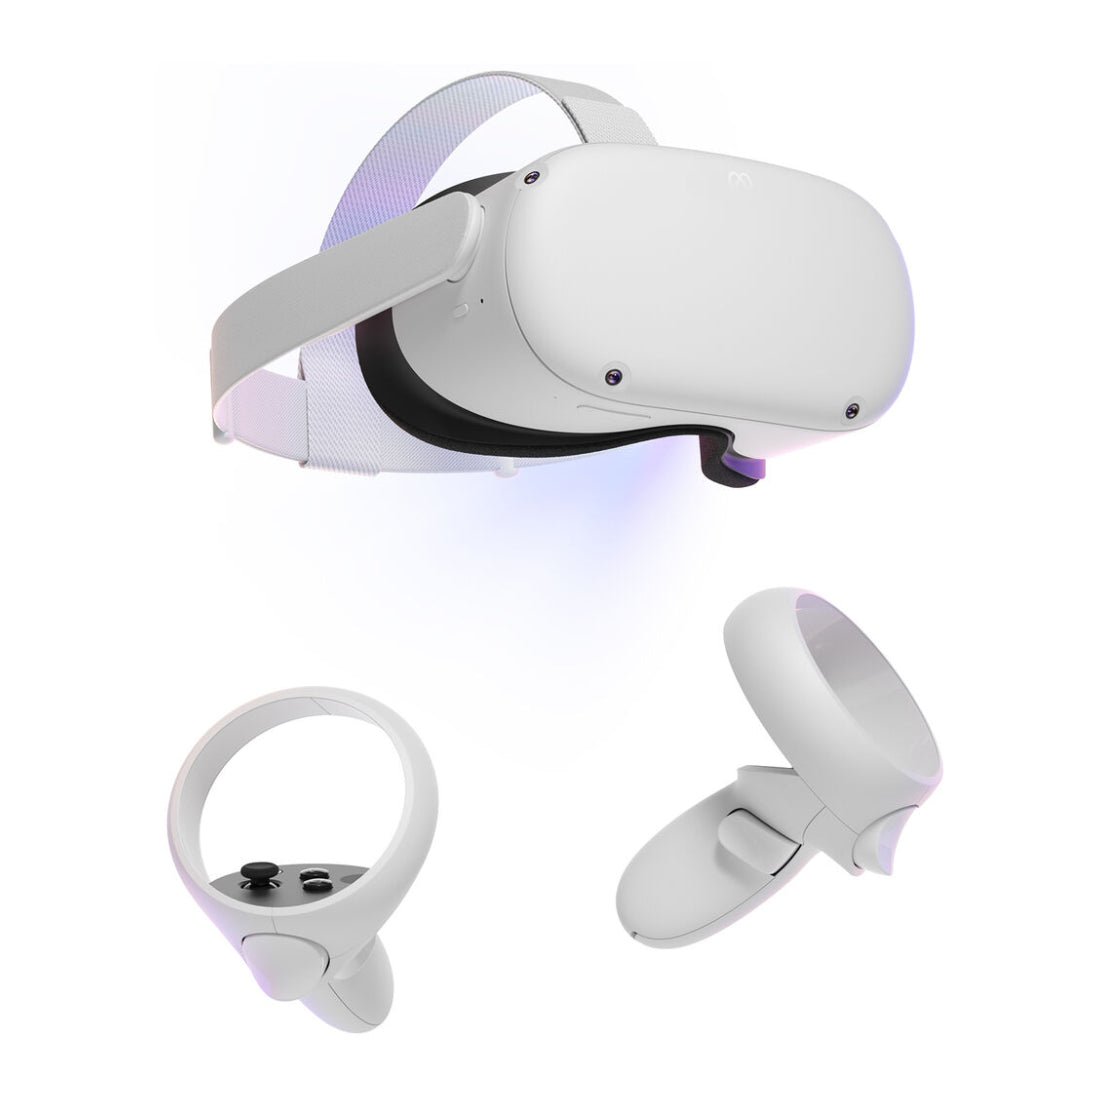 Meta Quest 2 Advanced All-In-One Virtual Reality Headset - Store 974 | ستور ٩٧٤